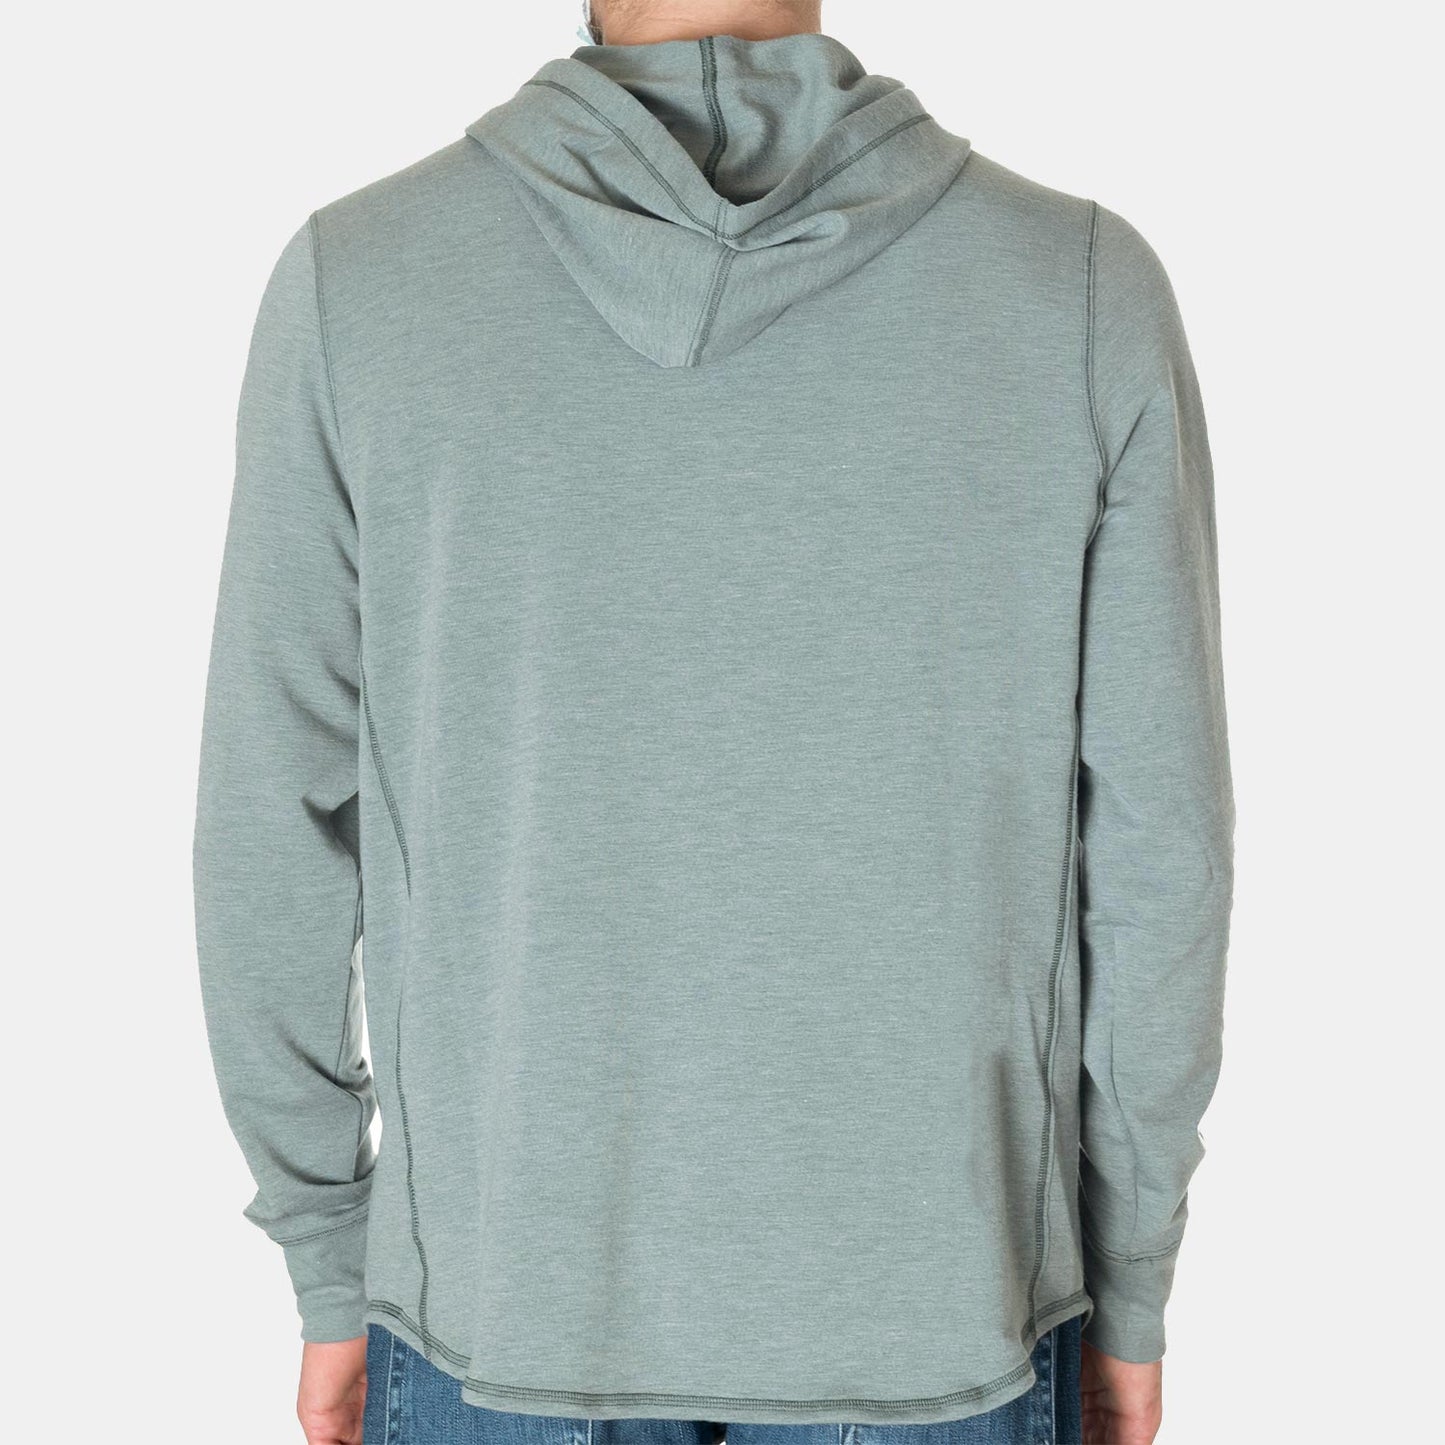 Toes on the Nose Super Soft Hoodie in Seafoam Green